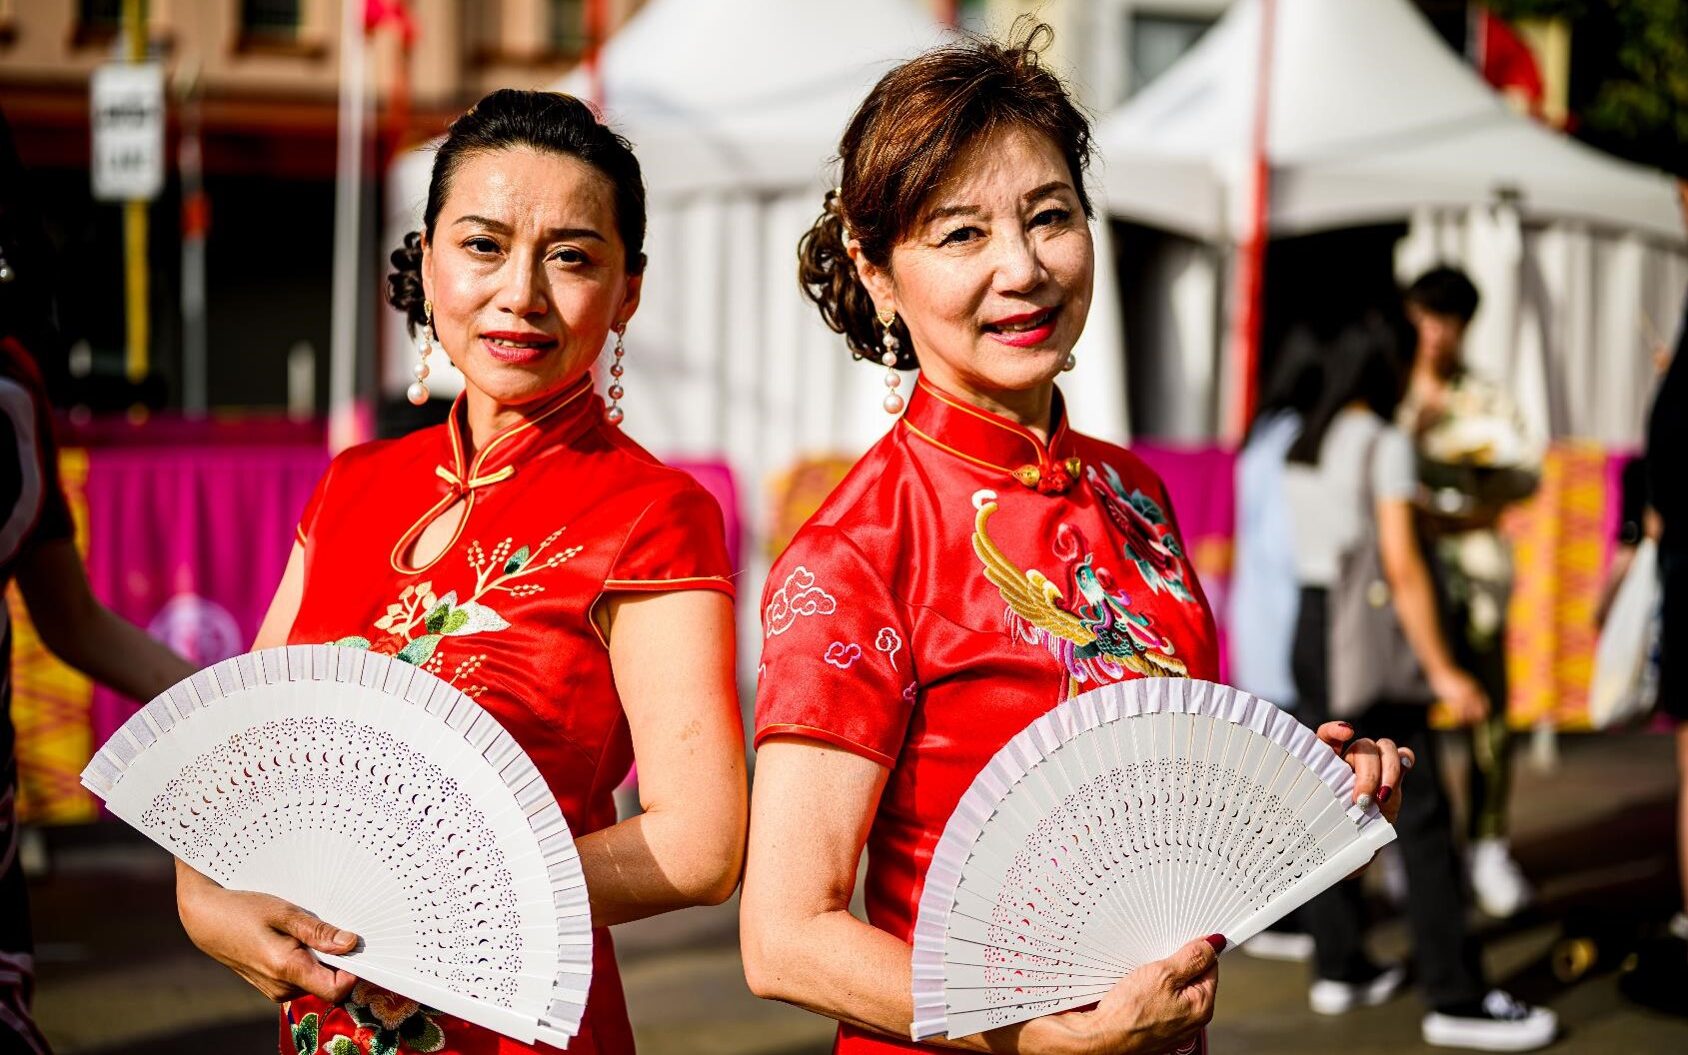 Celebrate Lunar New Year with a feast of content on SBS and SBS On Demand